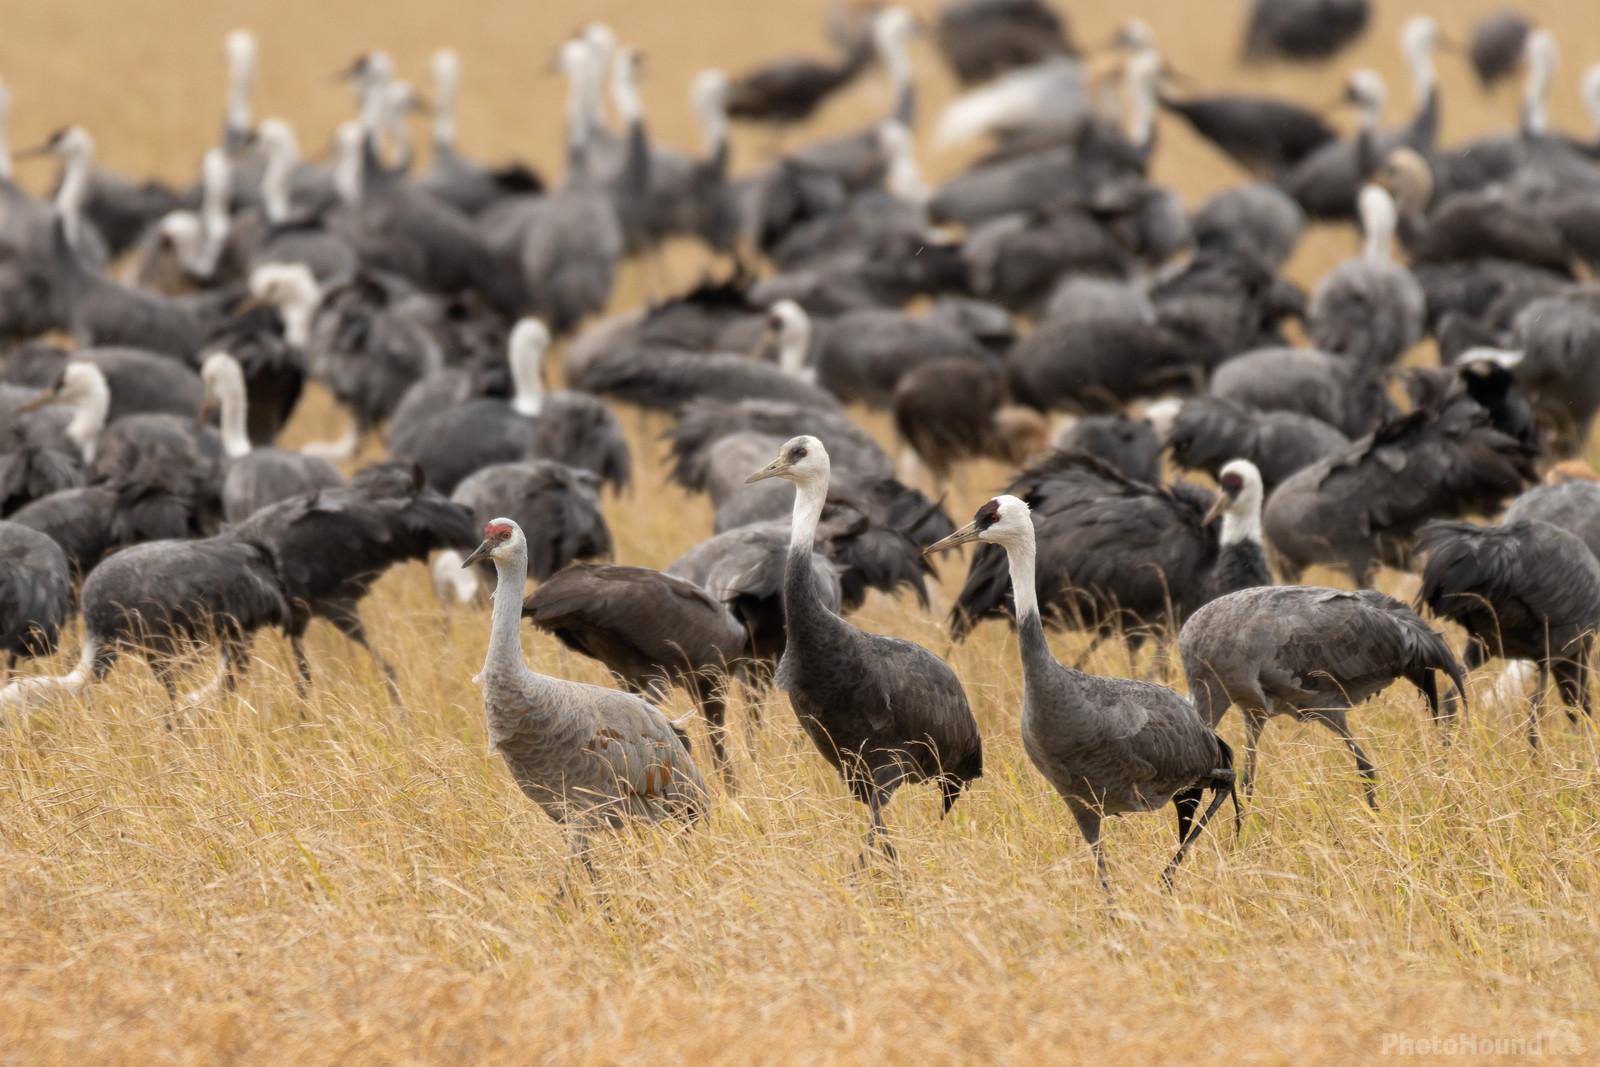 Image of Izumi Crane Migration Grounds by Colette English